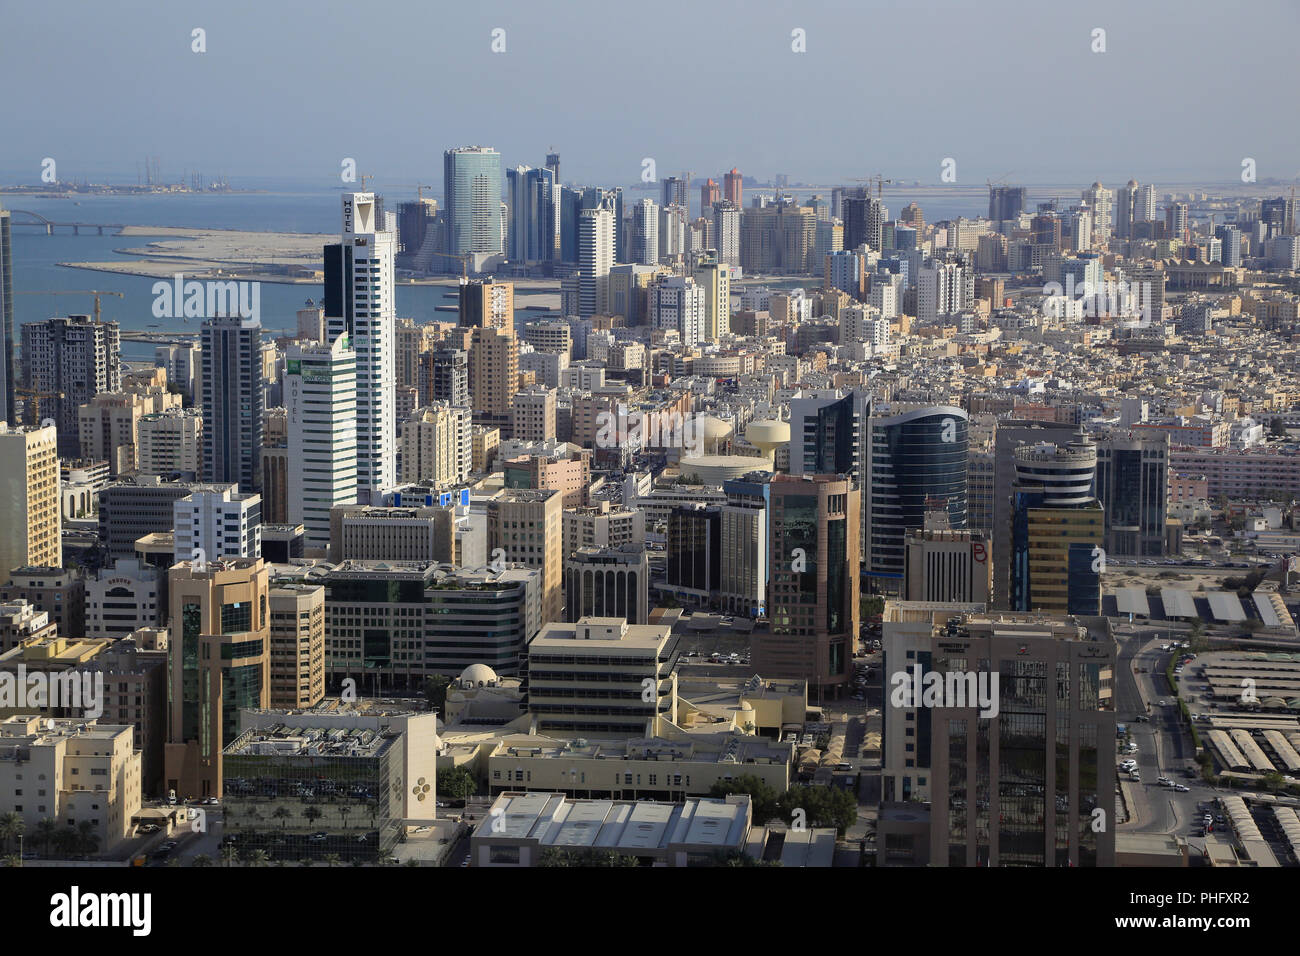 District Diplomatic Area in Mamama, capital of Bahrain Stock Photo